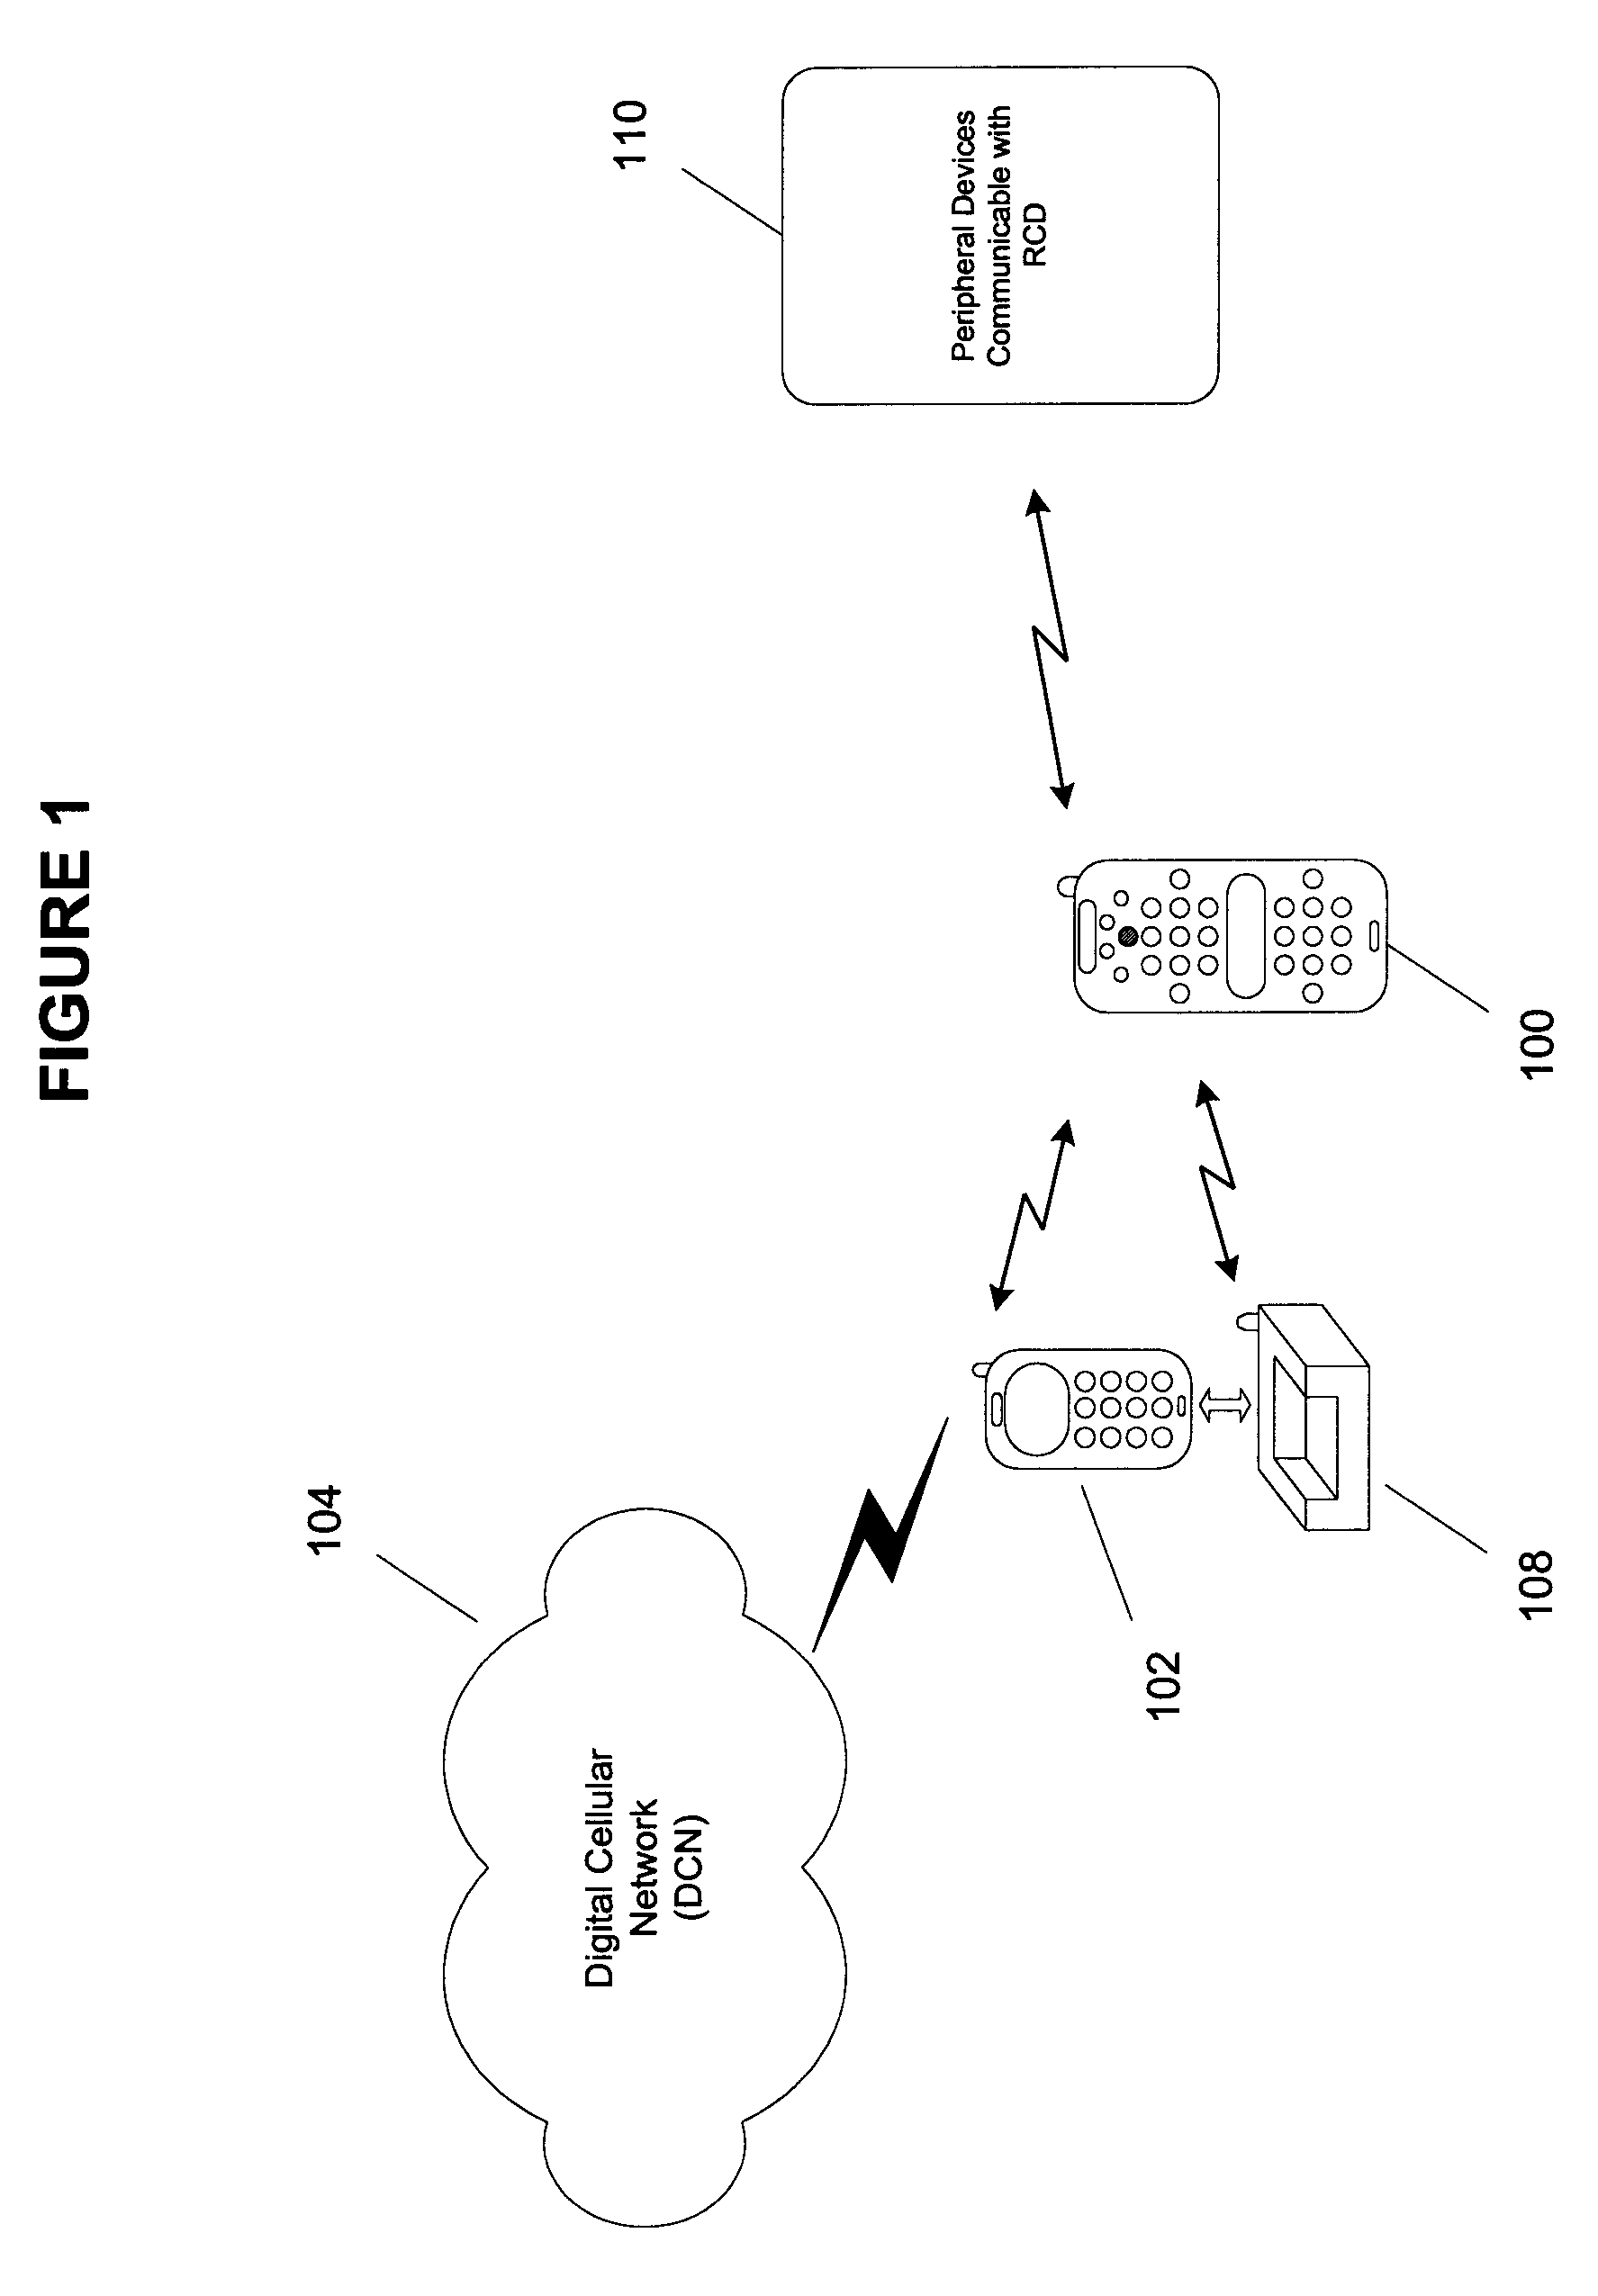 Remote control device having wireless phone interface